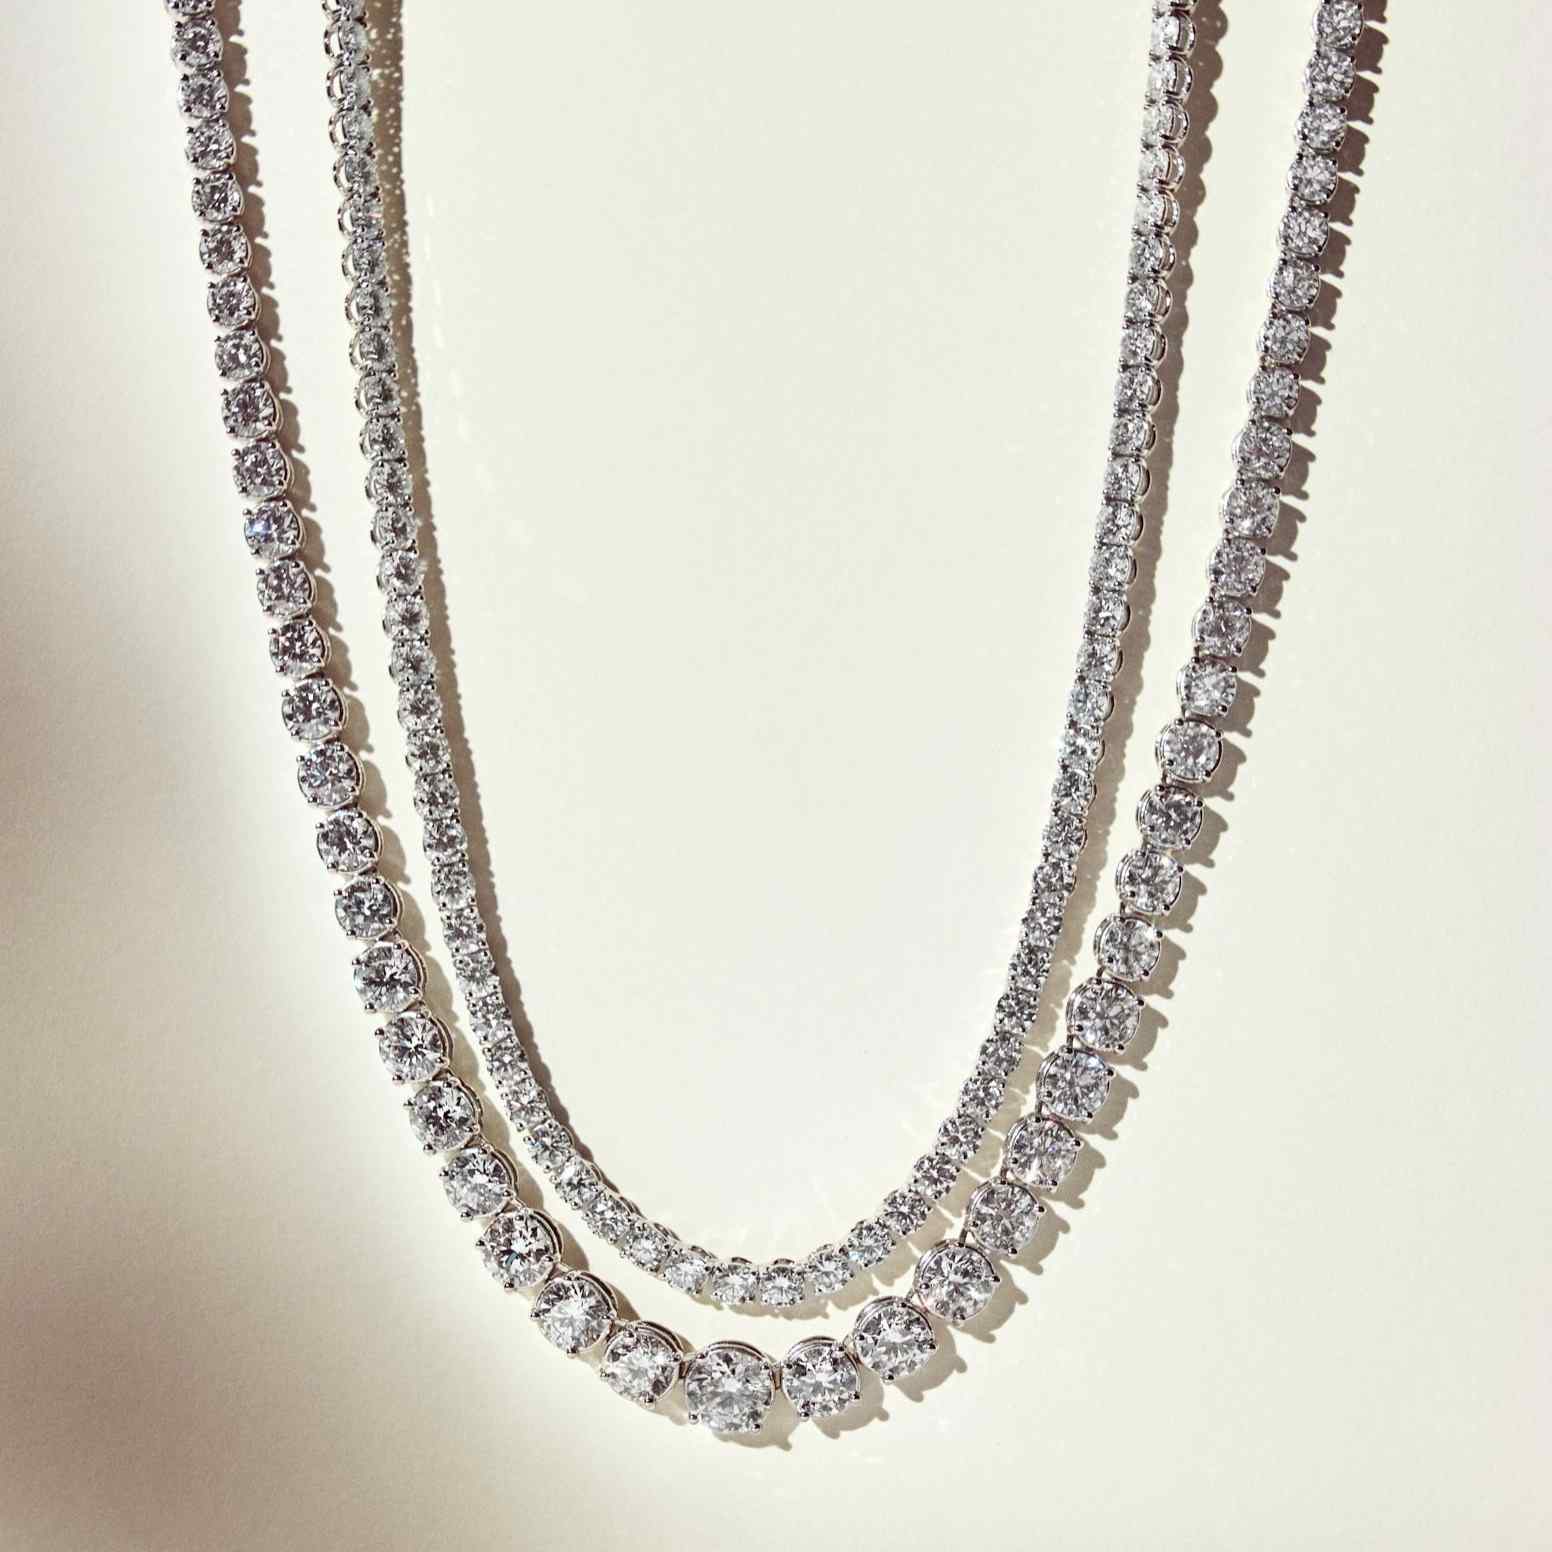 The Collier de Diamants necklace (15 total carat weight) shown hanging next to the Collier Rivière Tennis Necklace (25 total carat weight). 